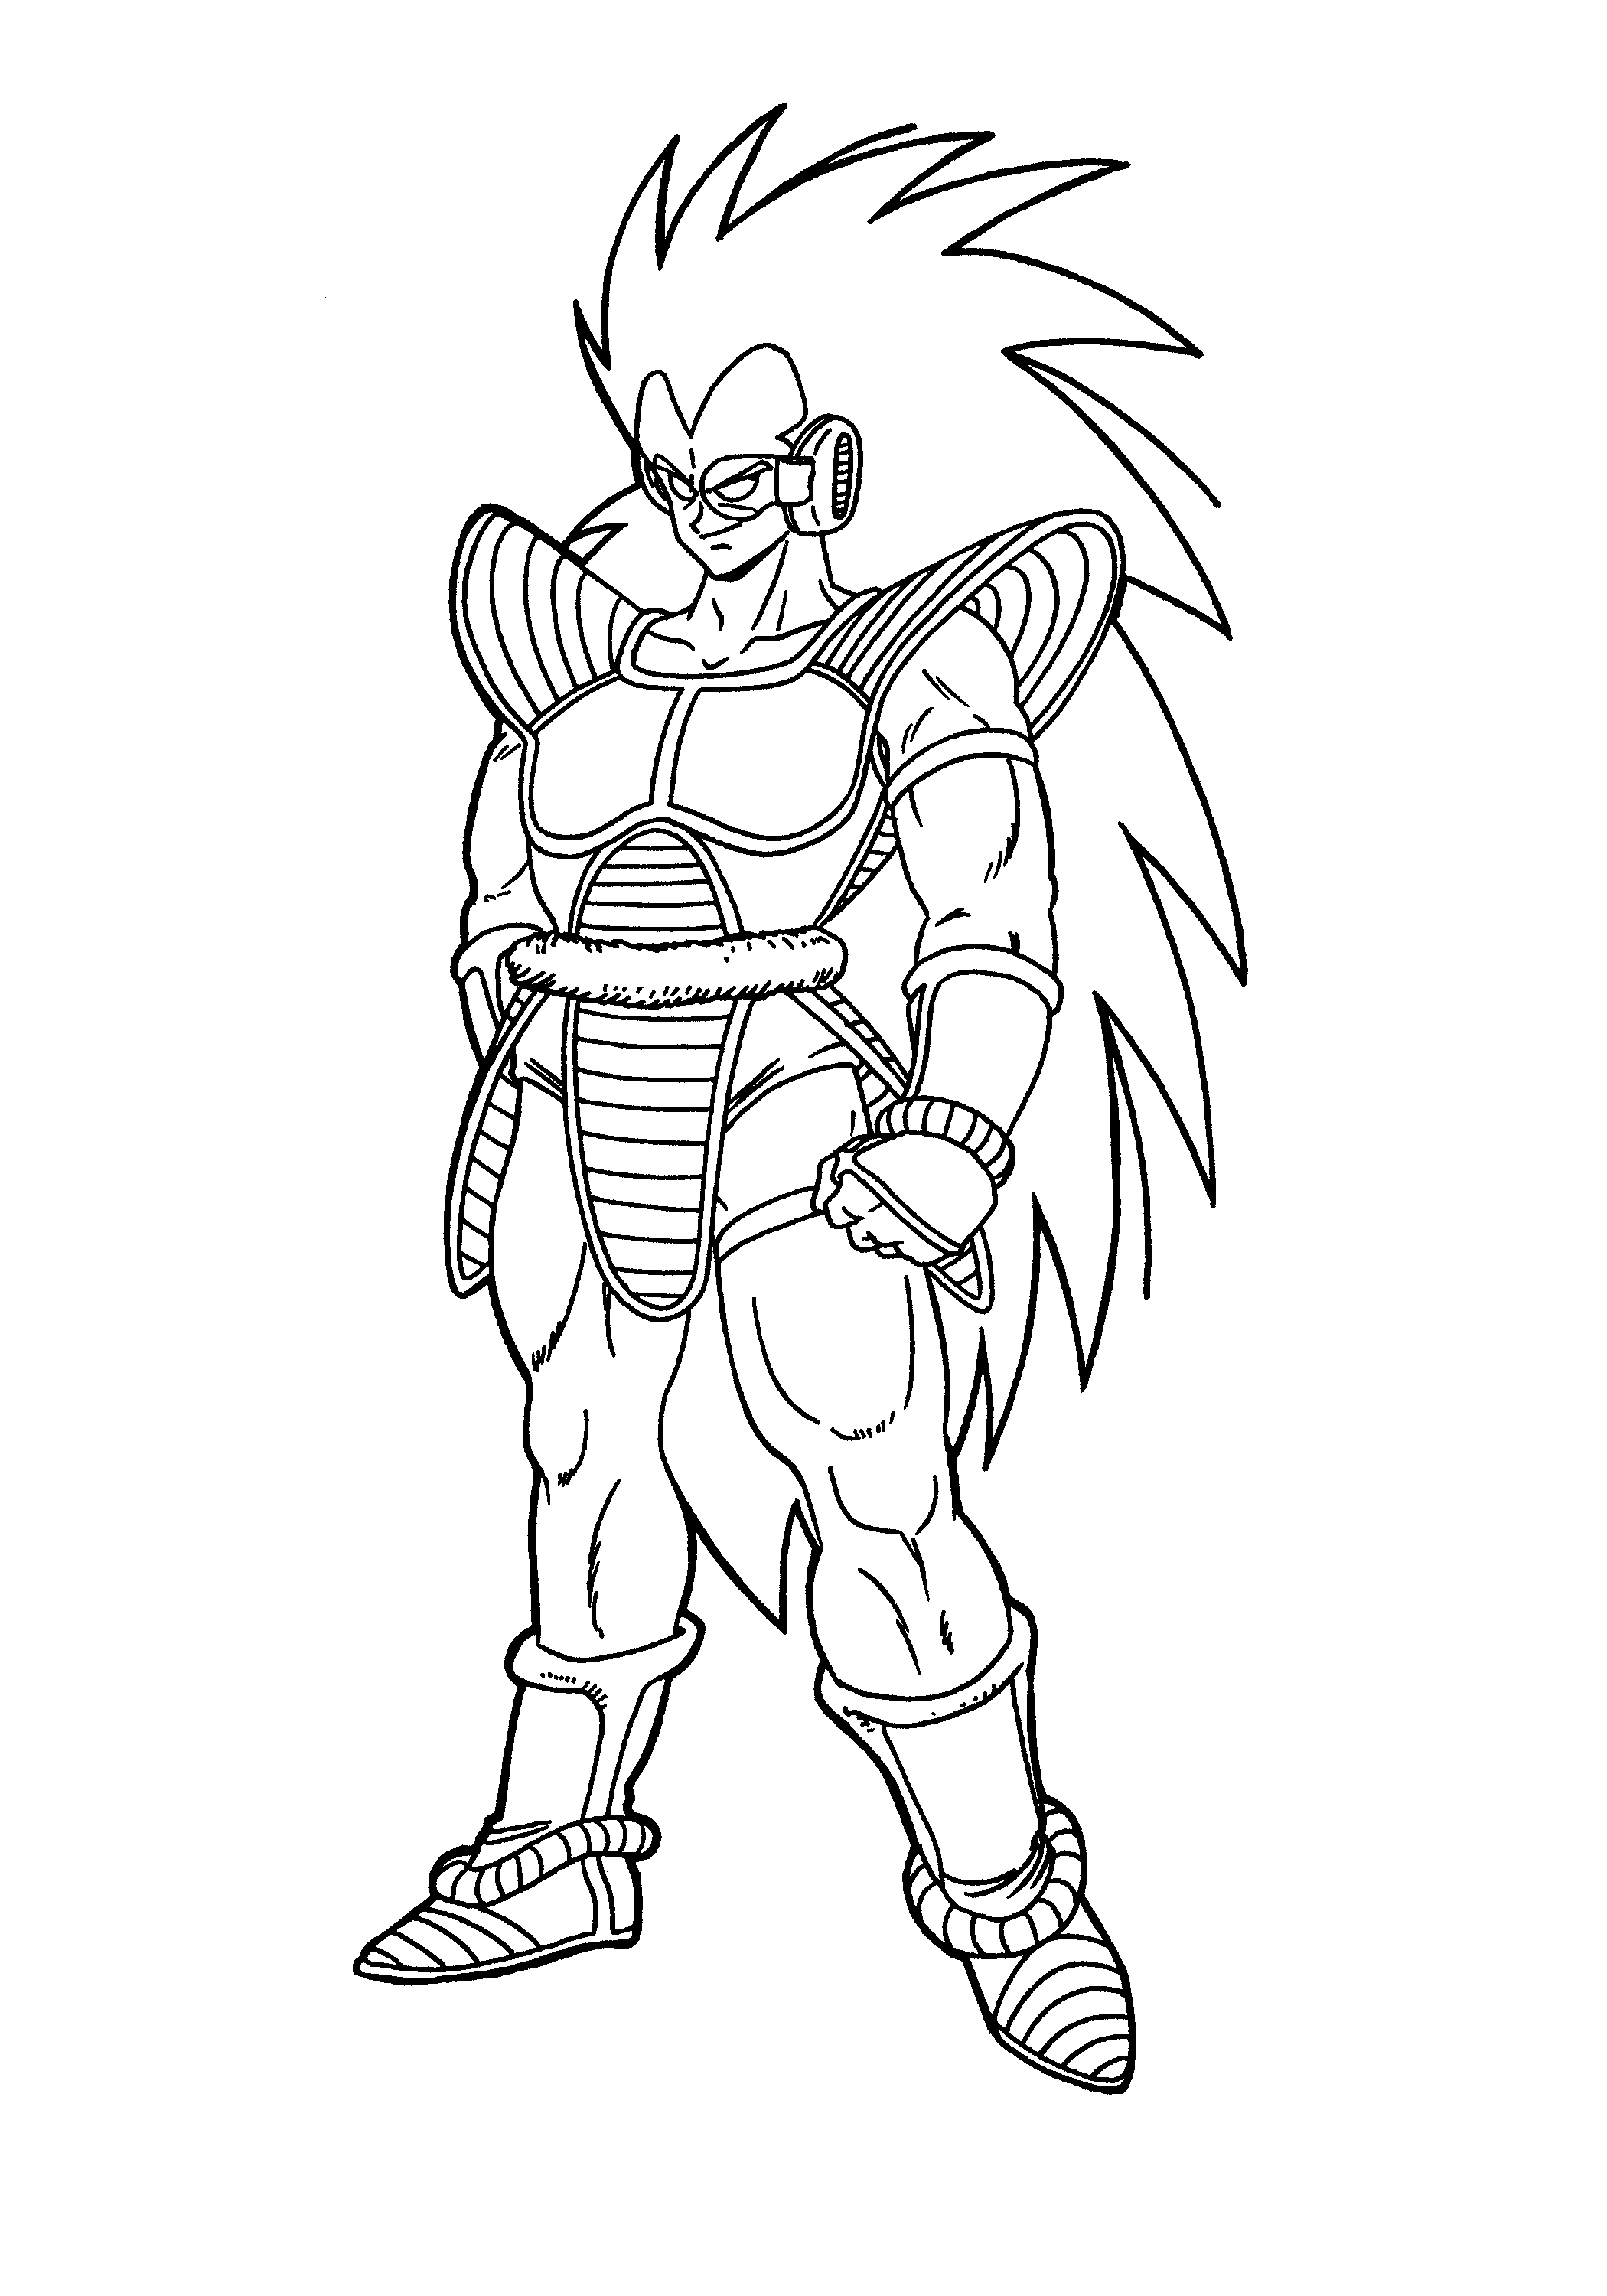 Dragon Ball Z Coloring Pages Bardock - Coloring and Drawing